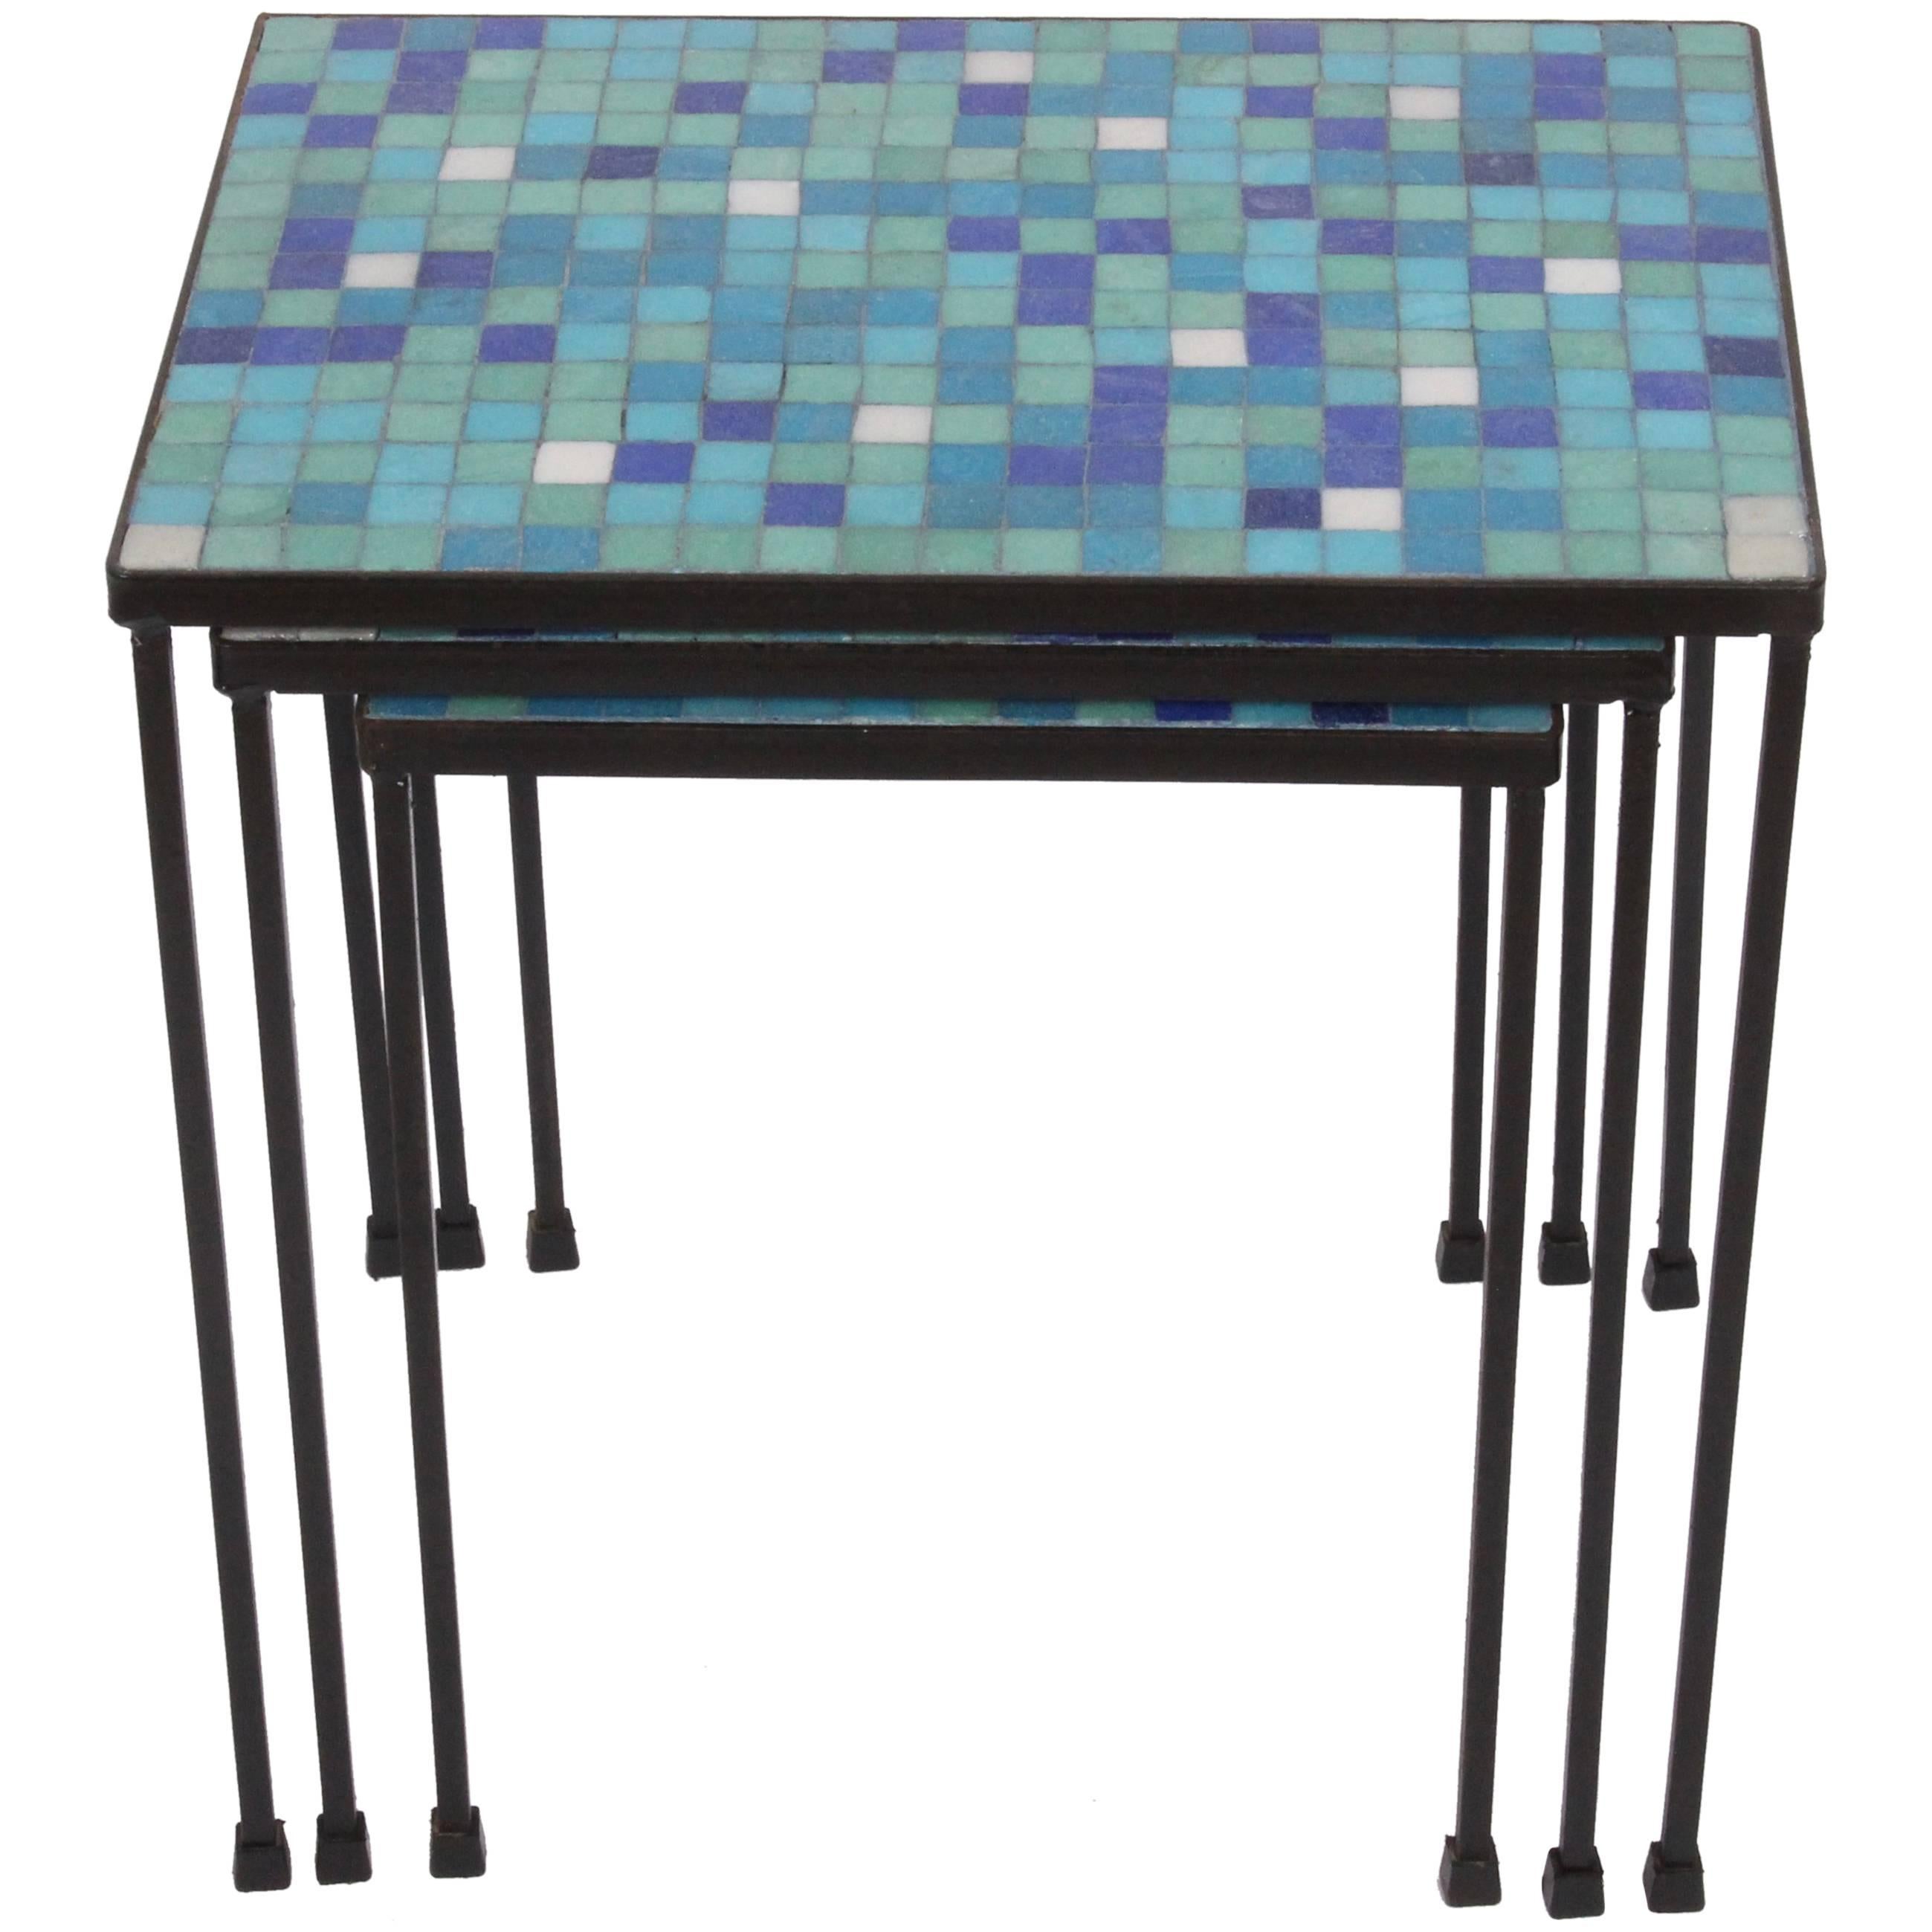 1950s Set of Three Black Wrought Iron and Blue and Green Tile Stacking Tables